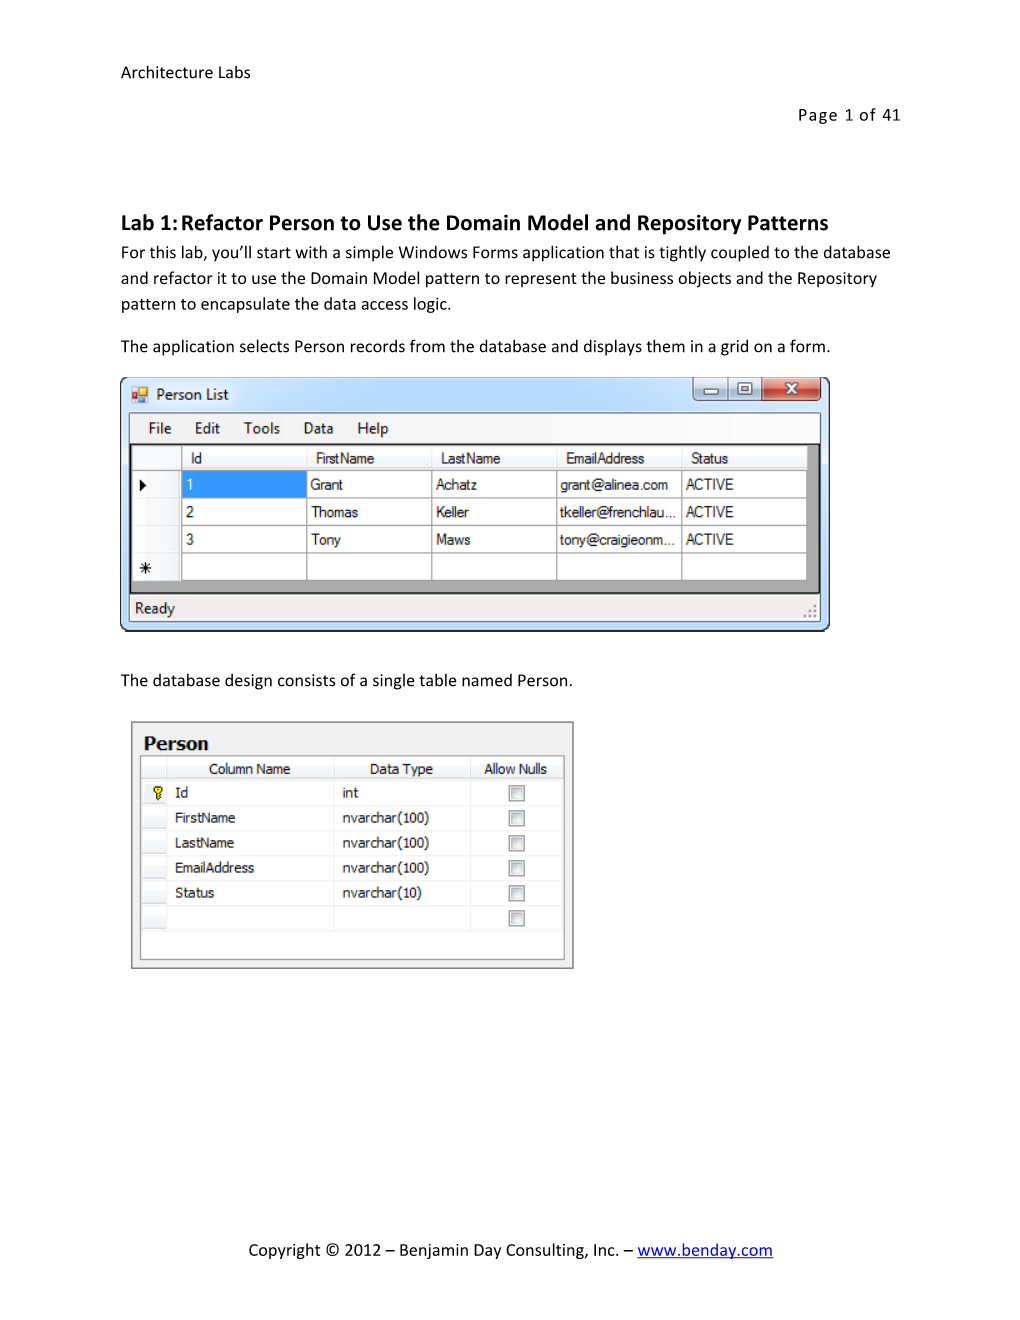 Lab 01: Refactor Person to Use the Domain Model and Repository Patterns